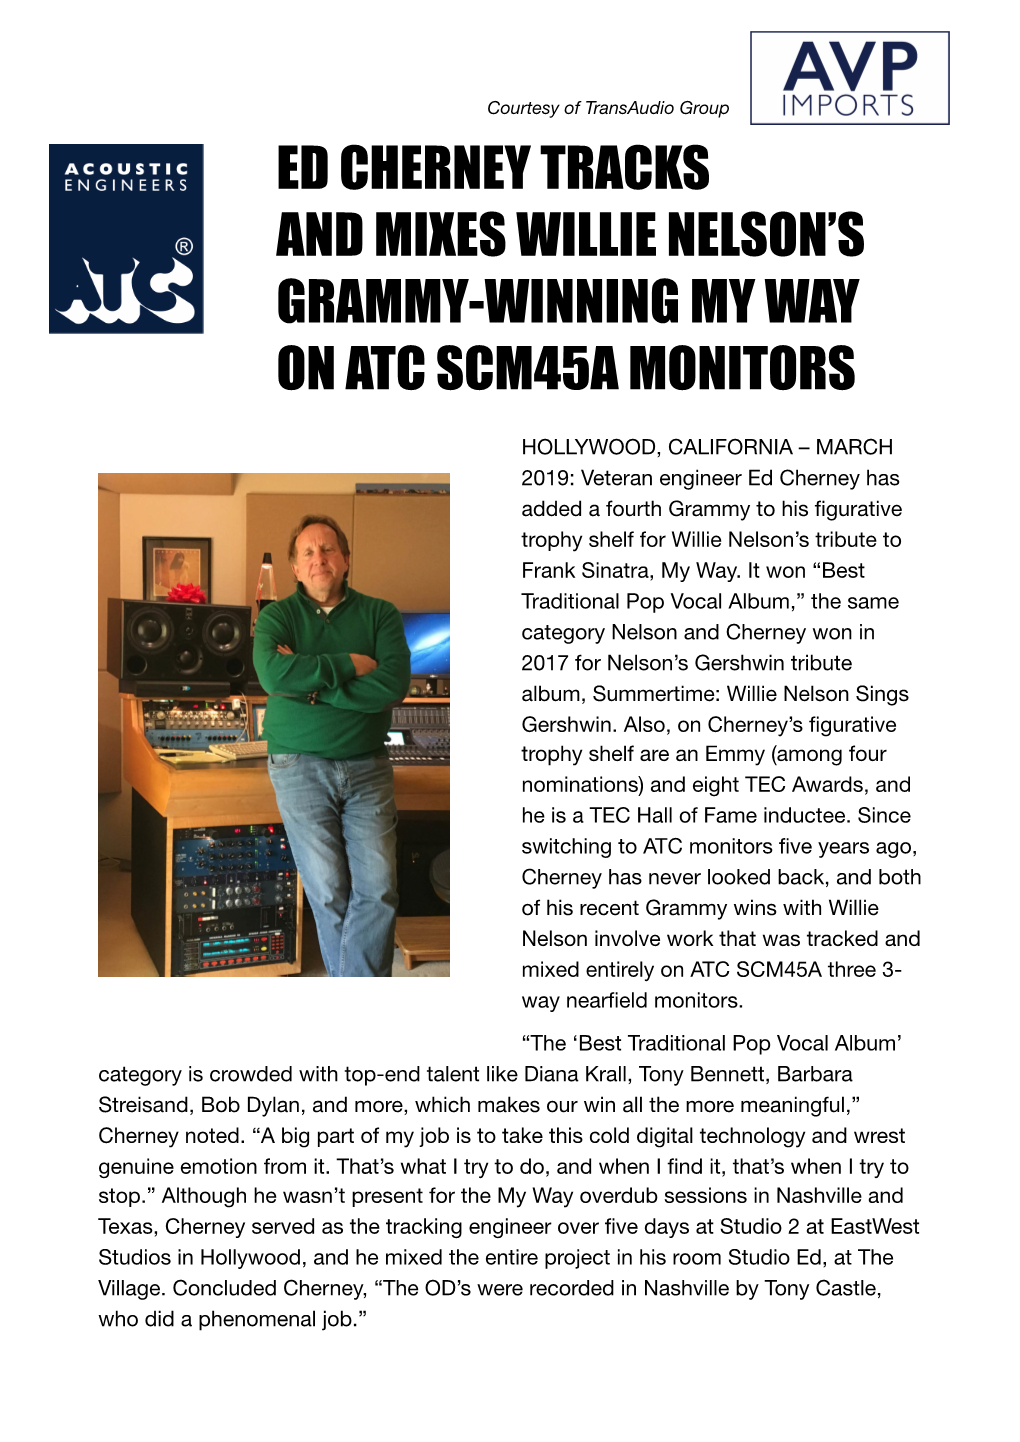 Ed Cherney Tracks and Mixes Willie Nelson’S Grammy-Winning My Way on Atc Scm45a Monitors